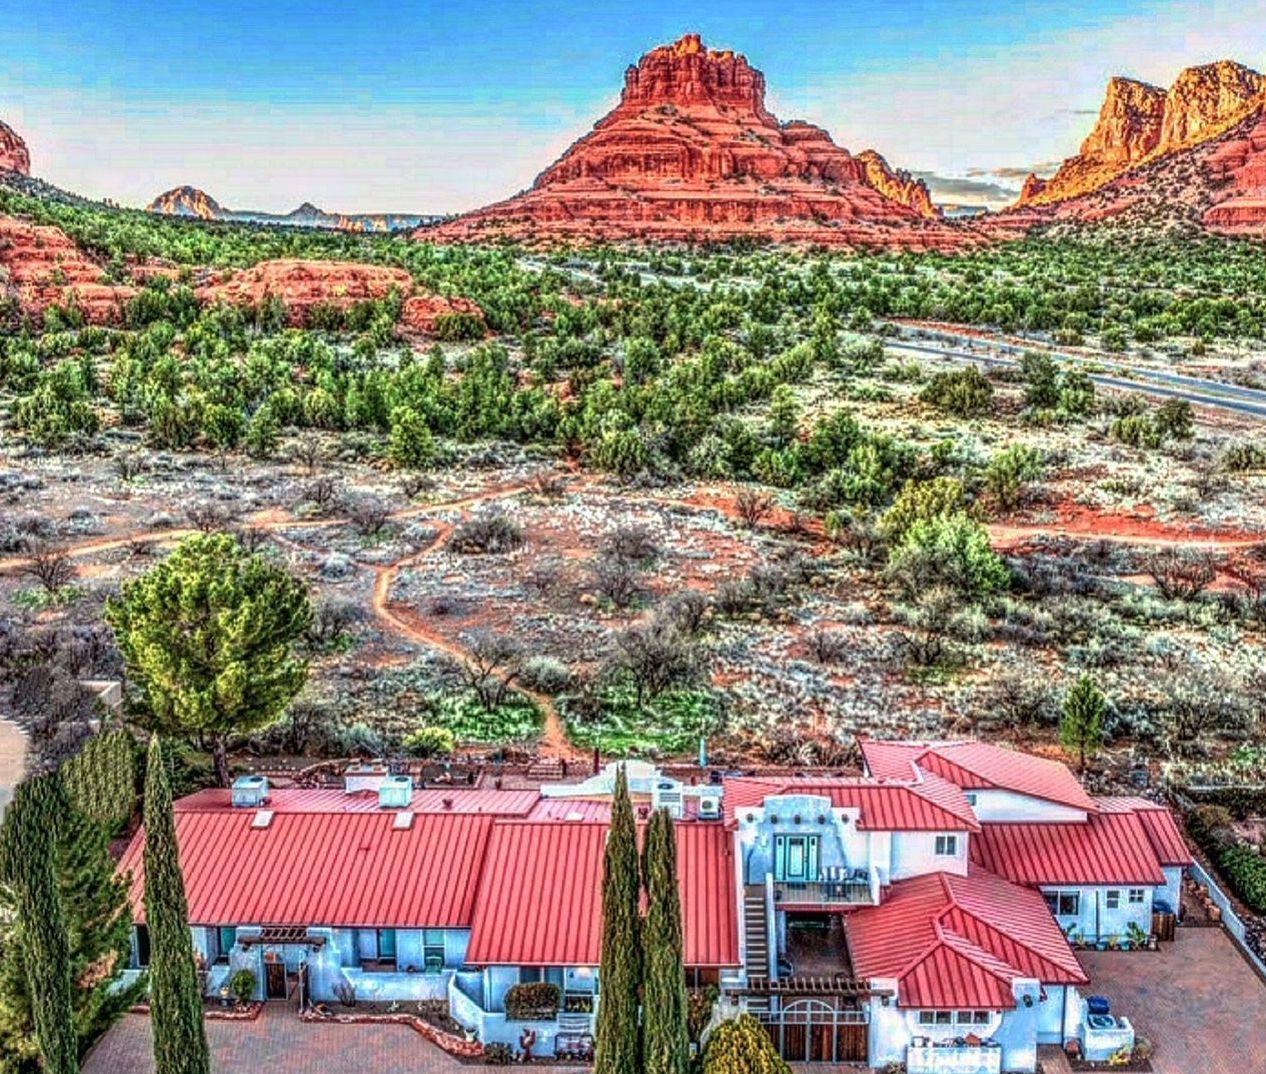 An aerial view of a large house in the desert with a mountain in the background.